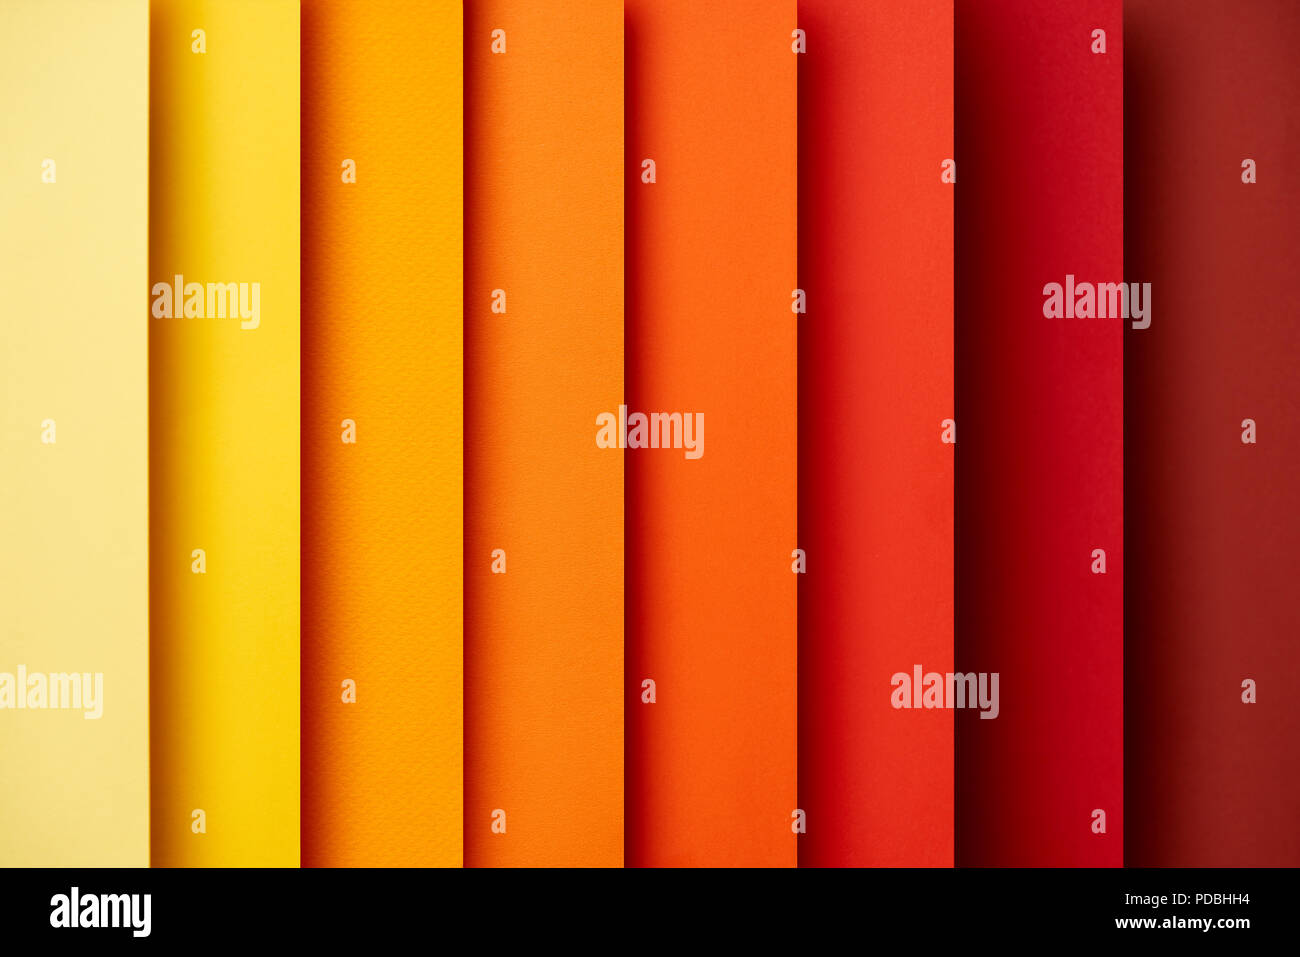 Download Abstract Background With Vertical Paper Sheets In Red And Yellow Tones Stock Photo Alamy Yellowimages Mockups